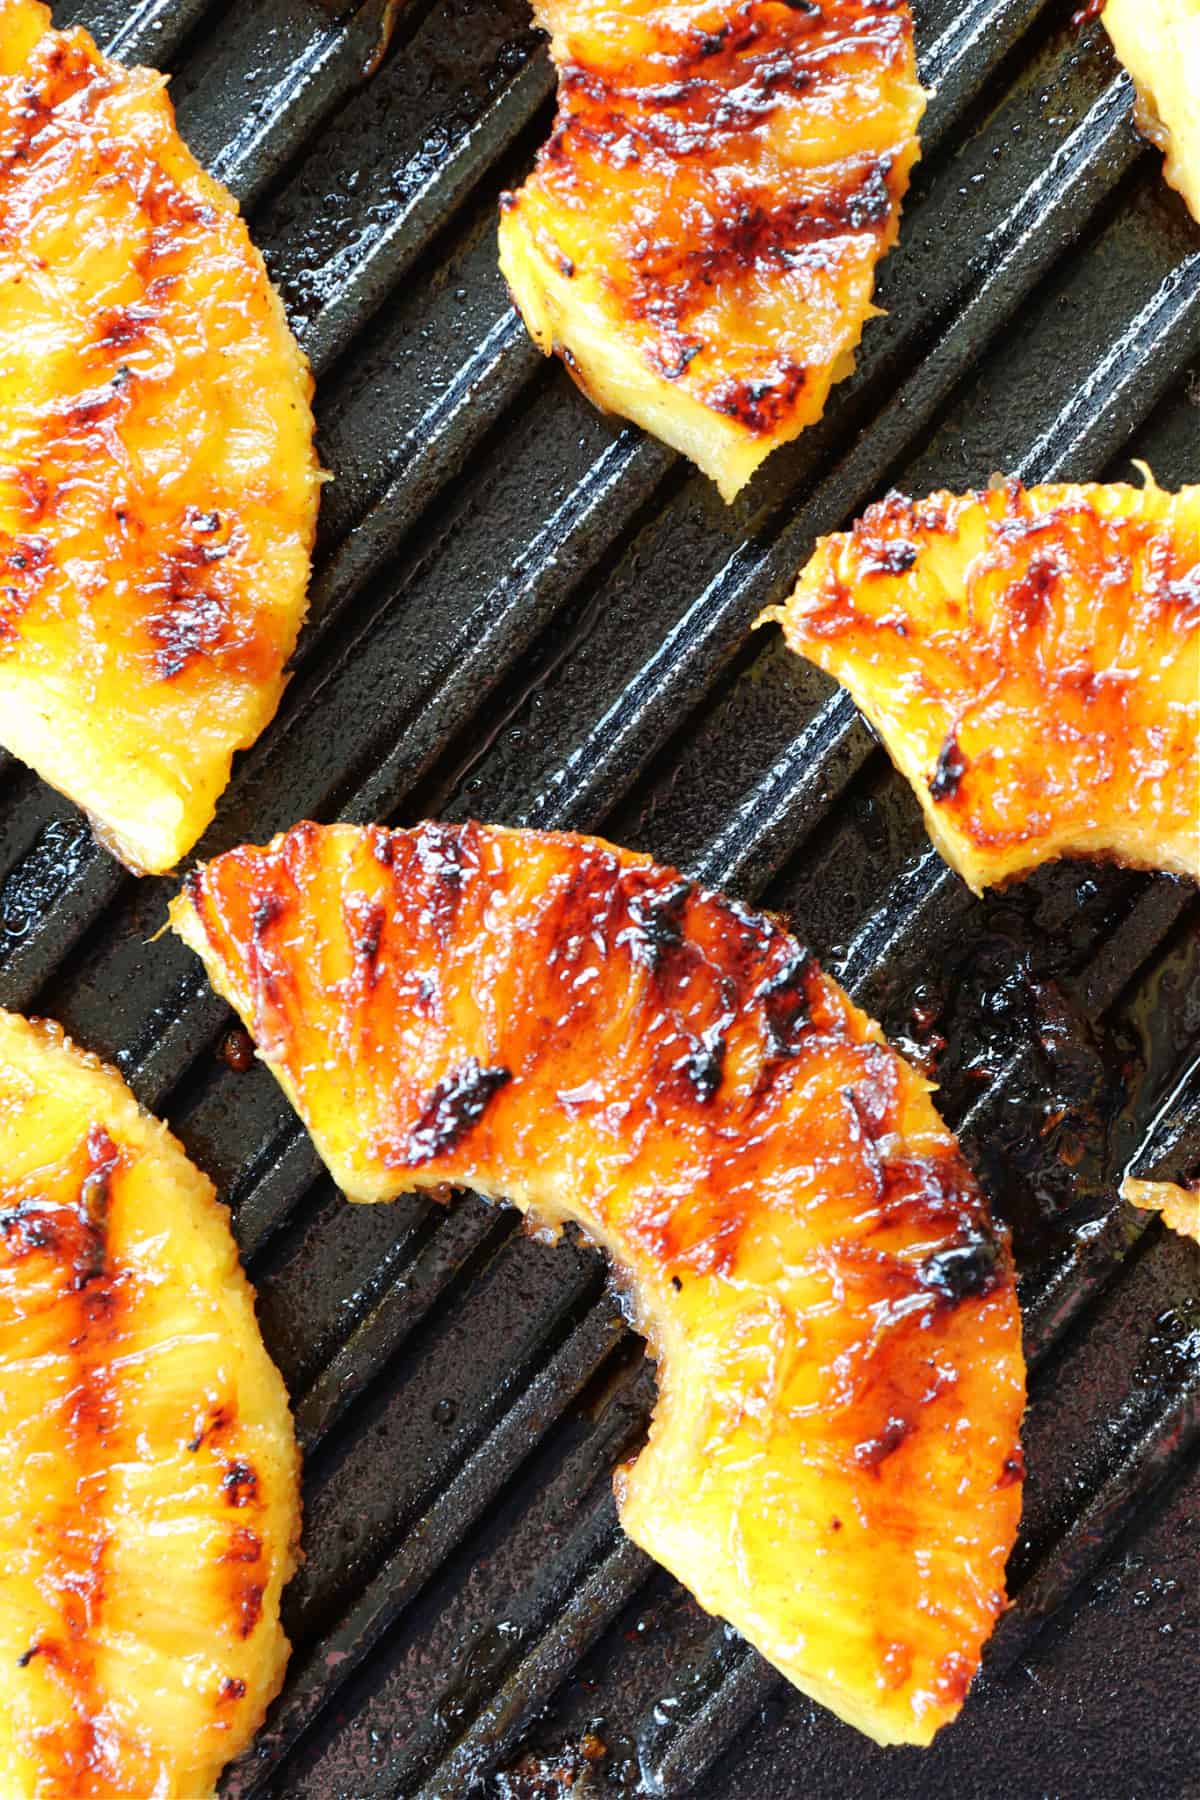 grilled pineapple 3 Grilled Pineapple